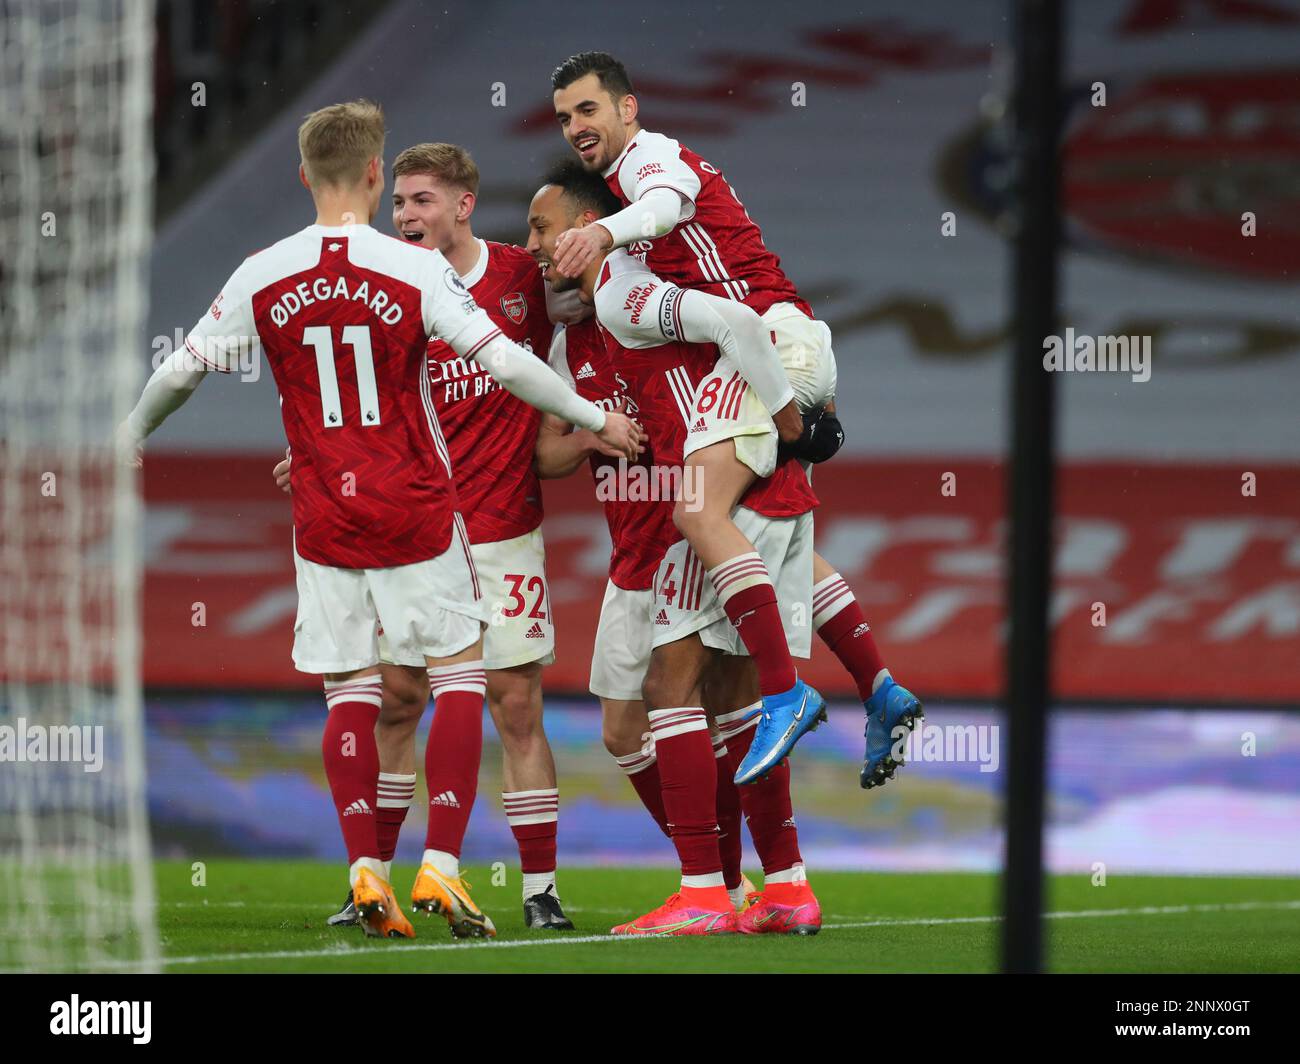 Arsenals Pierre-Emerick Aubameyang, centre, celebrates after scoring his sides second goal during the English Premier League soccer match between Arsenal and Leeds United at the Emirates stadium in London, England, Sunday, Feb.